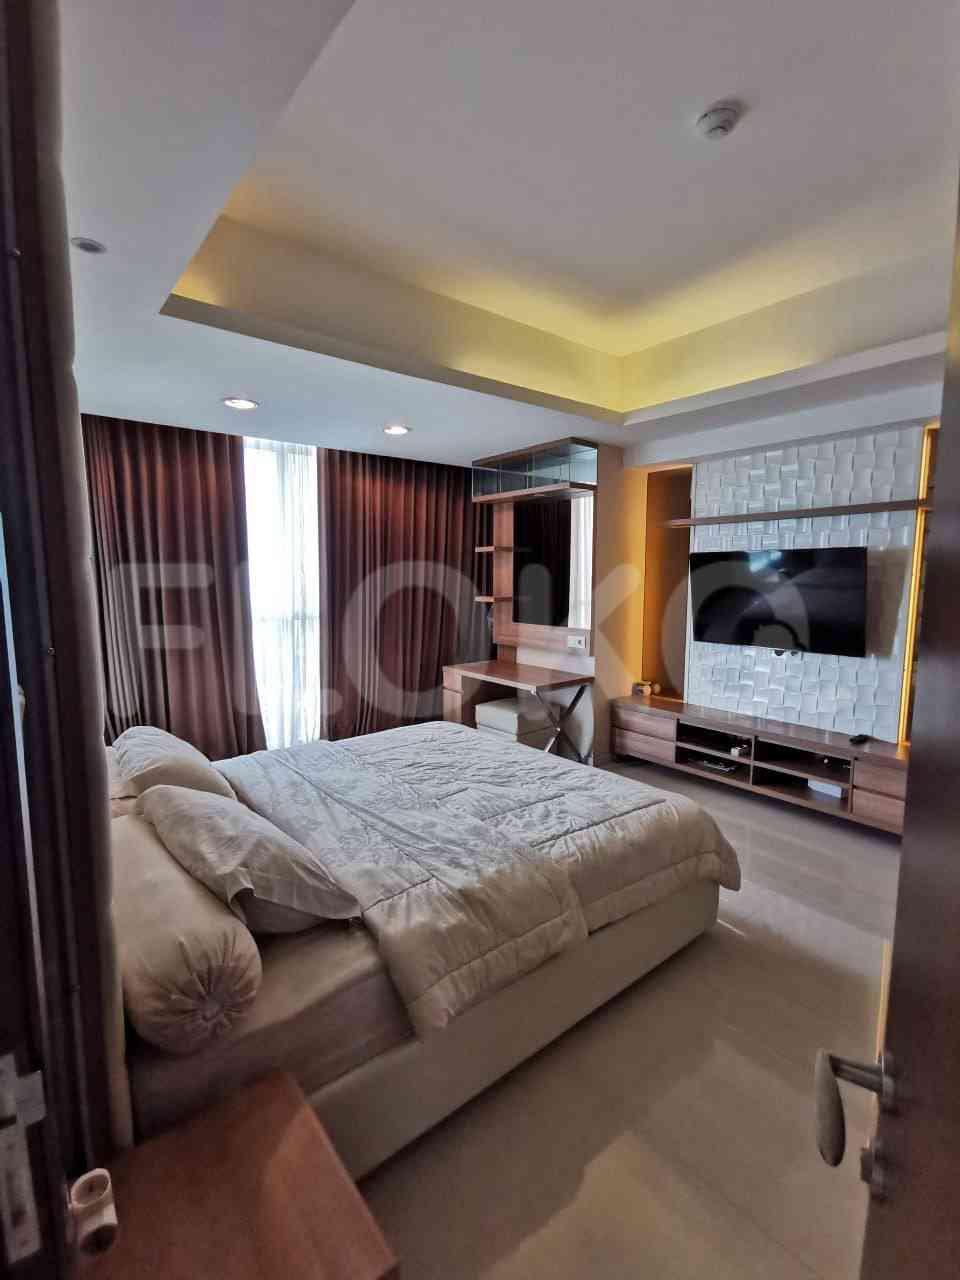 2 Bedroom on 26th Floor for Rent in Kemang Village Residence - fkea2f 5